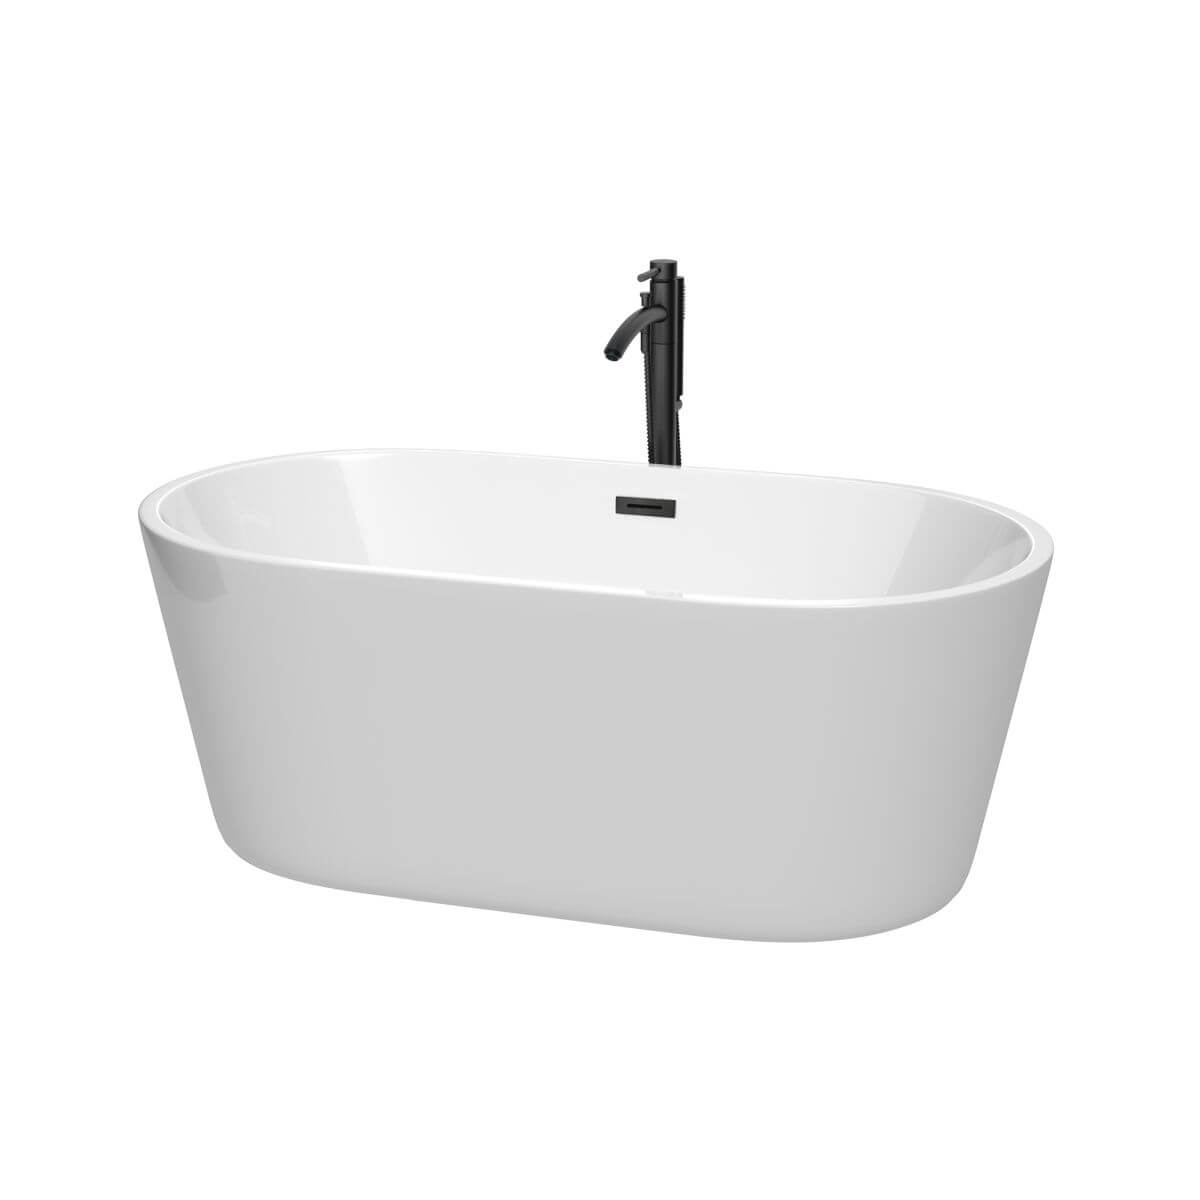 Wyndham Collection Carissa 60 inch Freestanding Bathtub in White with Floor Mounted Faucet, Drain and Overflow Trim in Matte Black - WCOBT101260MBATPBK